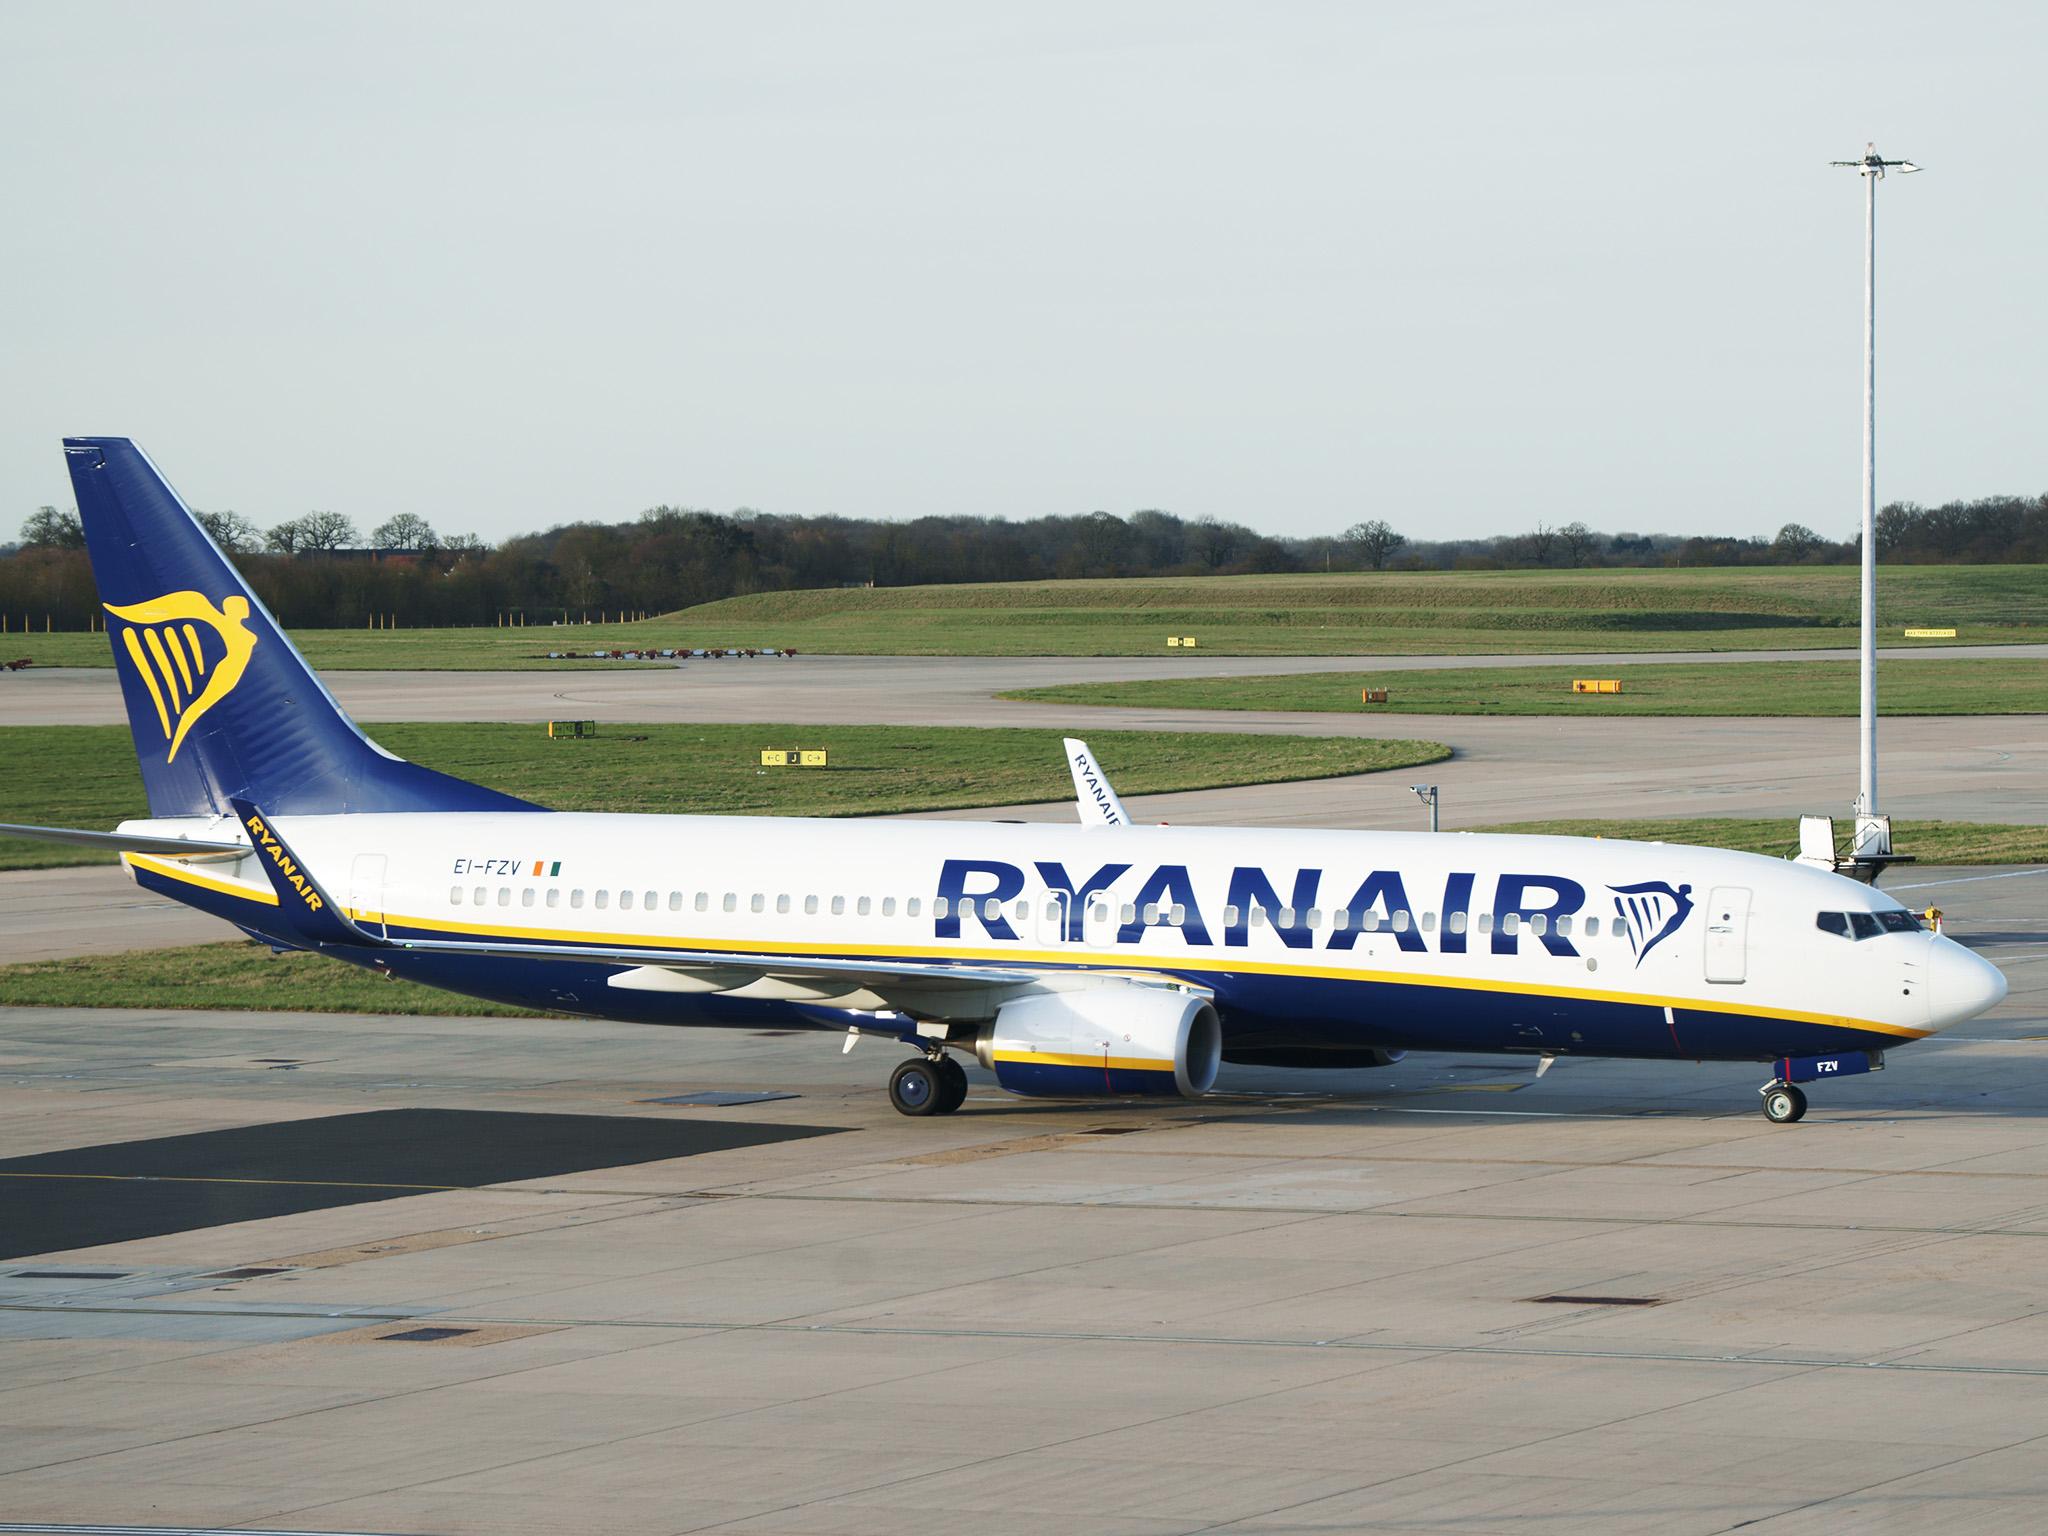 Ryanair flight had been travelling from Krakow to Dublin before being forced to land at Stansted